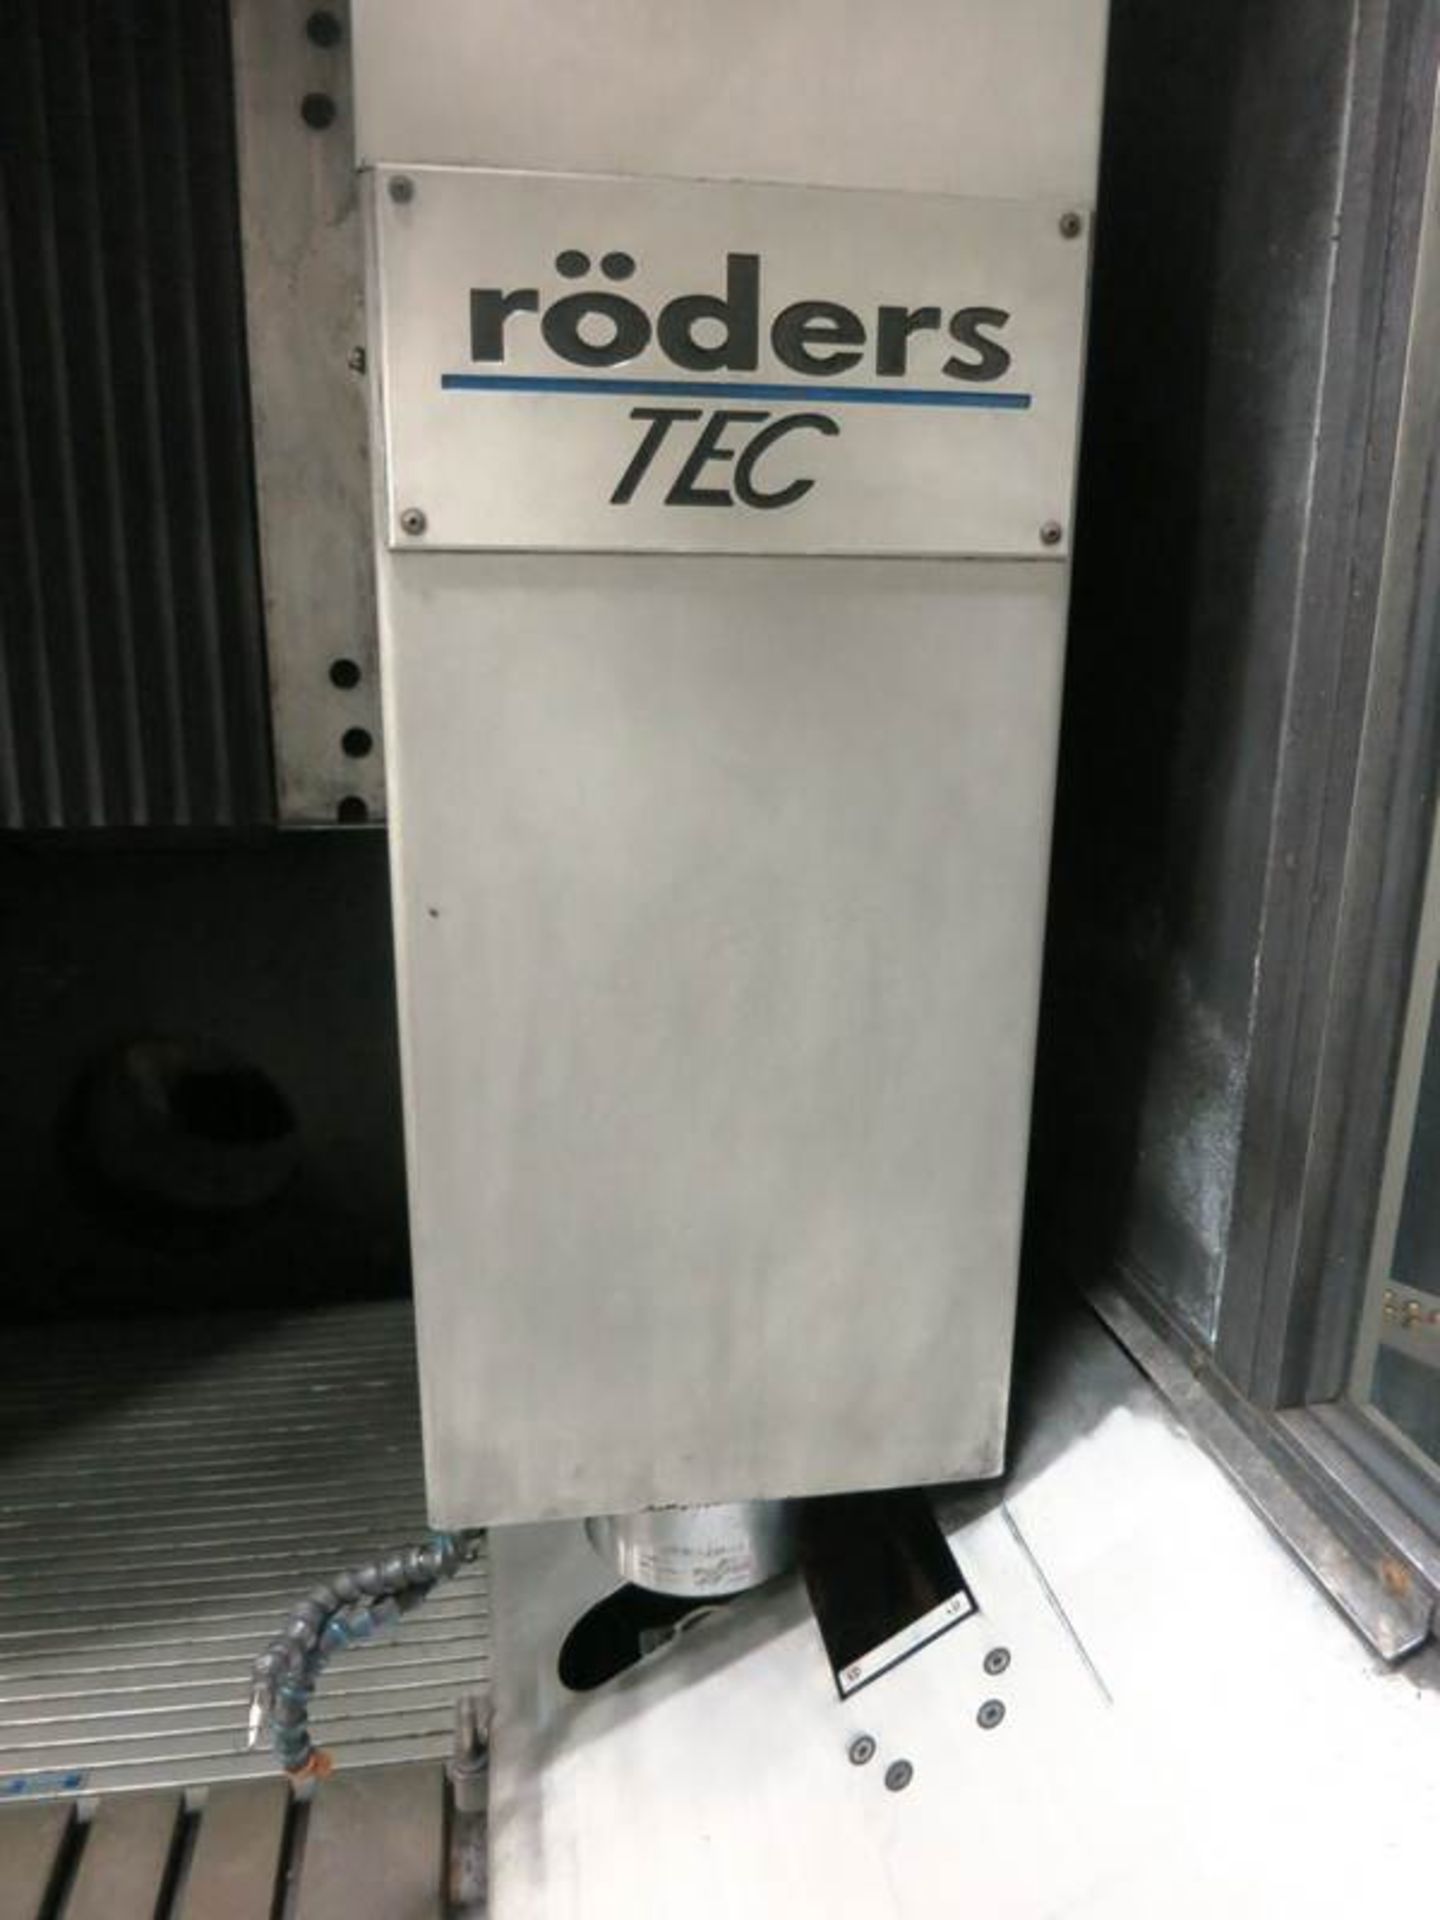 Roders TEC RFM 600 CNC 3-Axis High speed Vertical Machining Center, S/N 87995-43, New 1998 General - Image 5 of 9